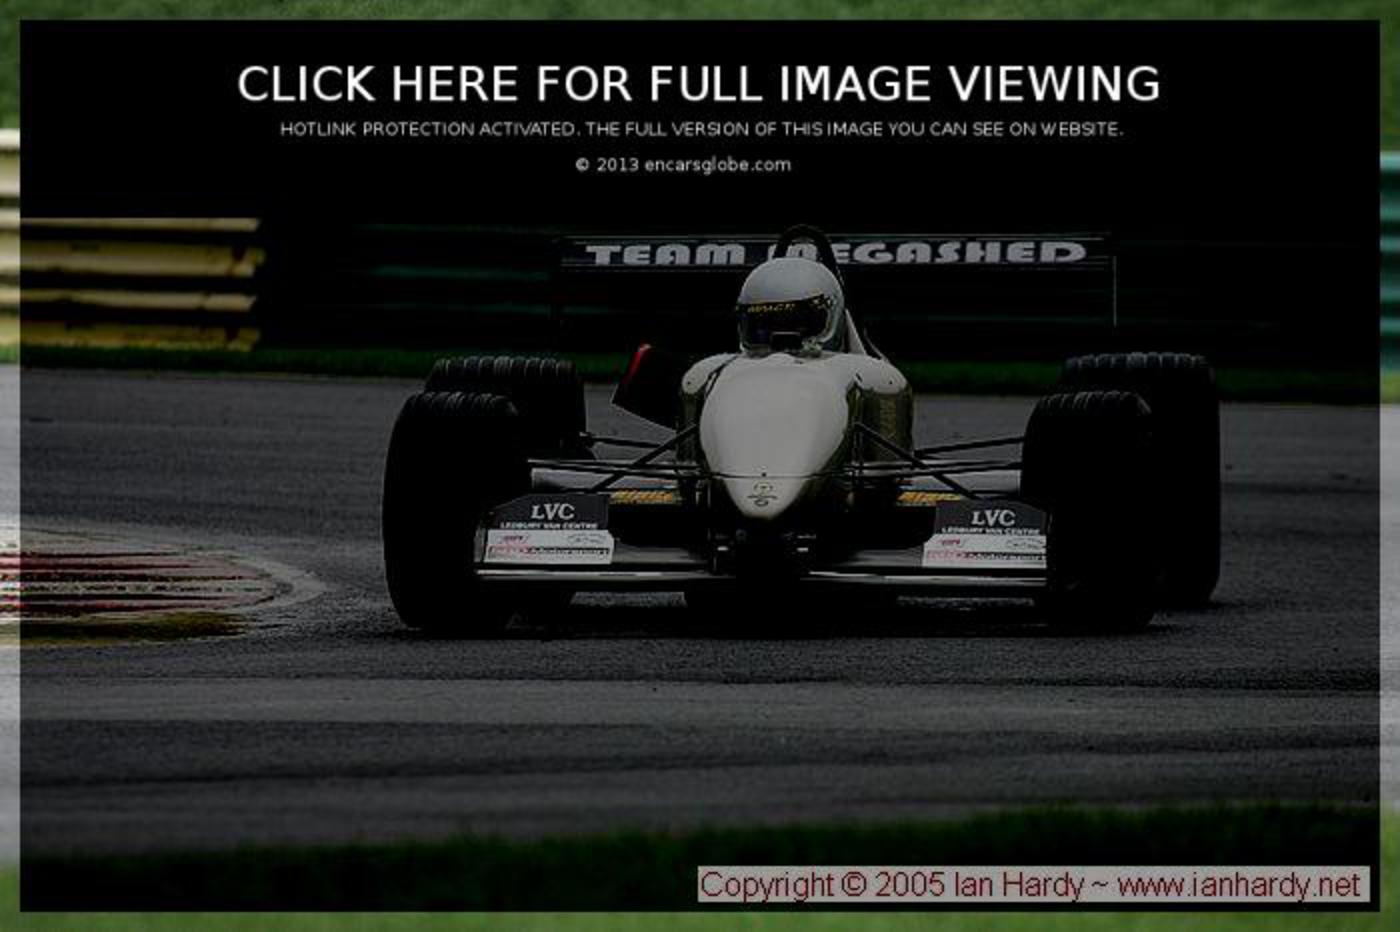 Dallara F397: Photo gallery, complete information about model ...